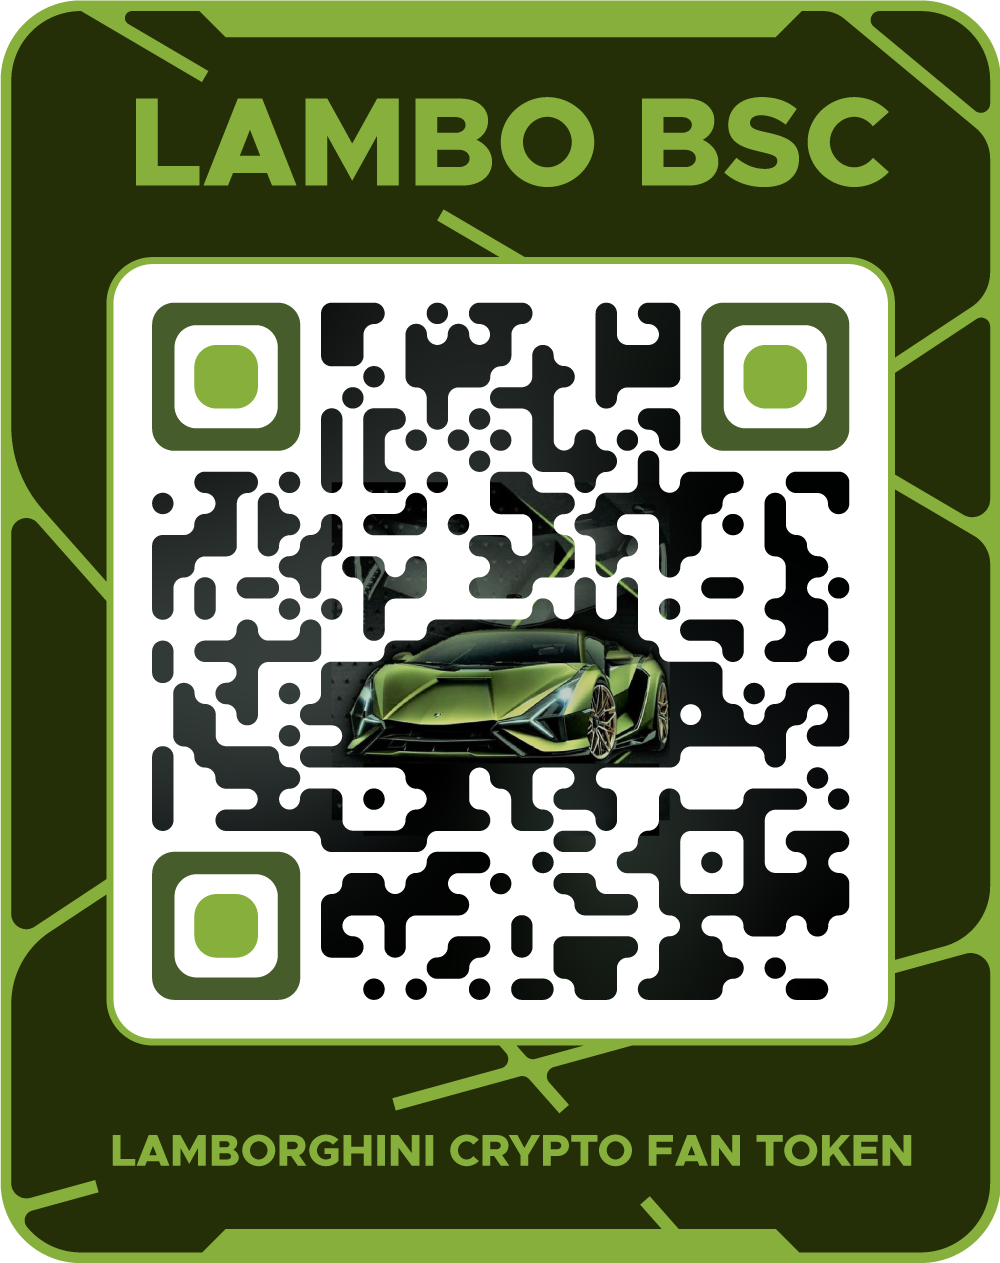 Lambo BSC Token (BEP-20) - Smart Contract Audited By RD Auditors. Will Be The Next DOGECOIN?